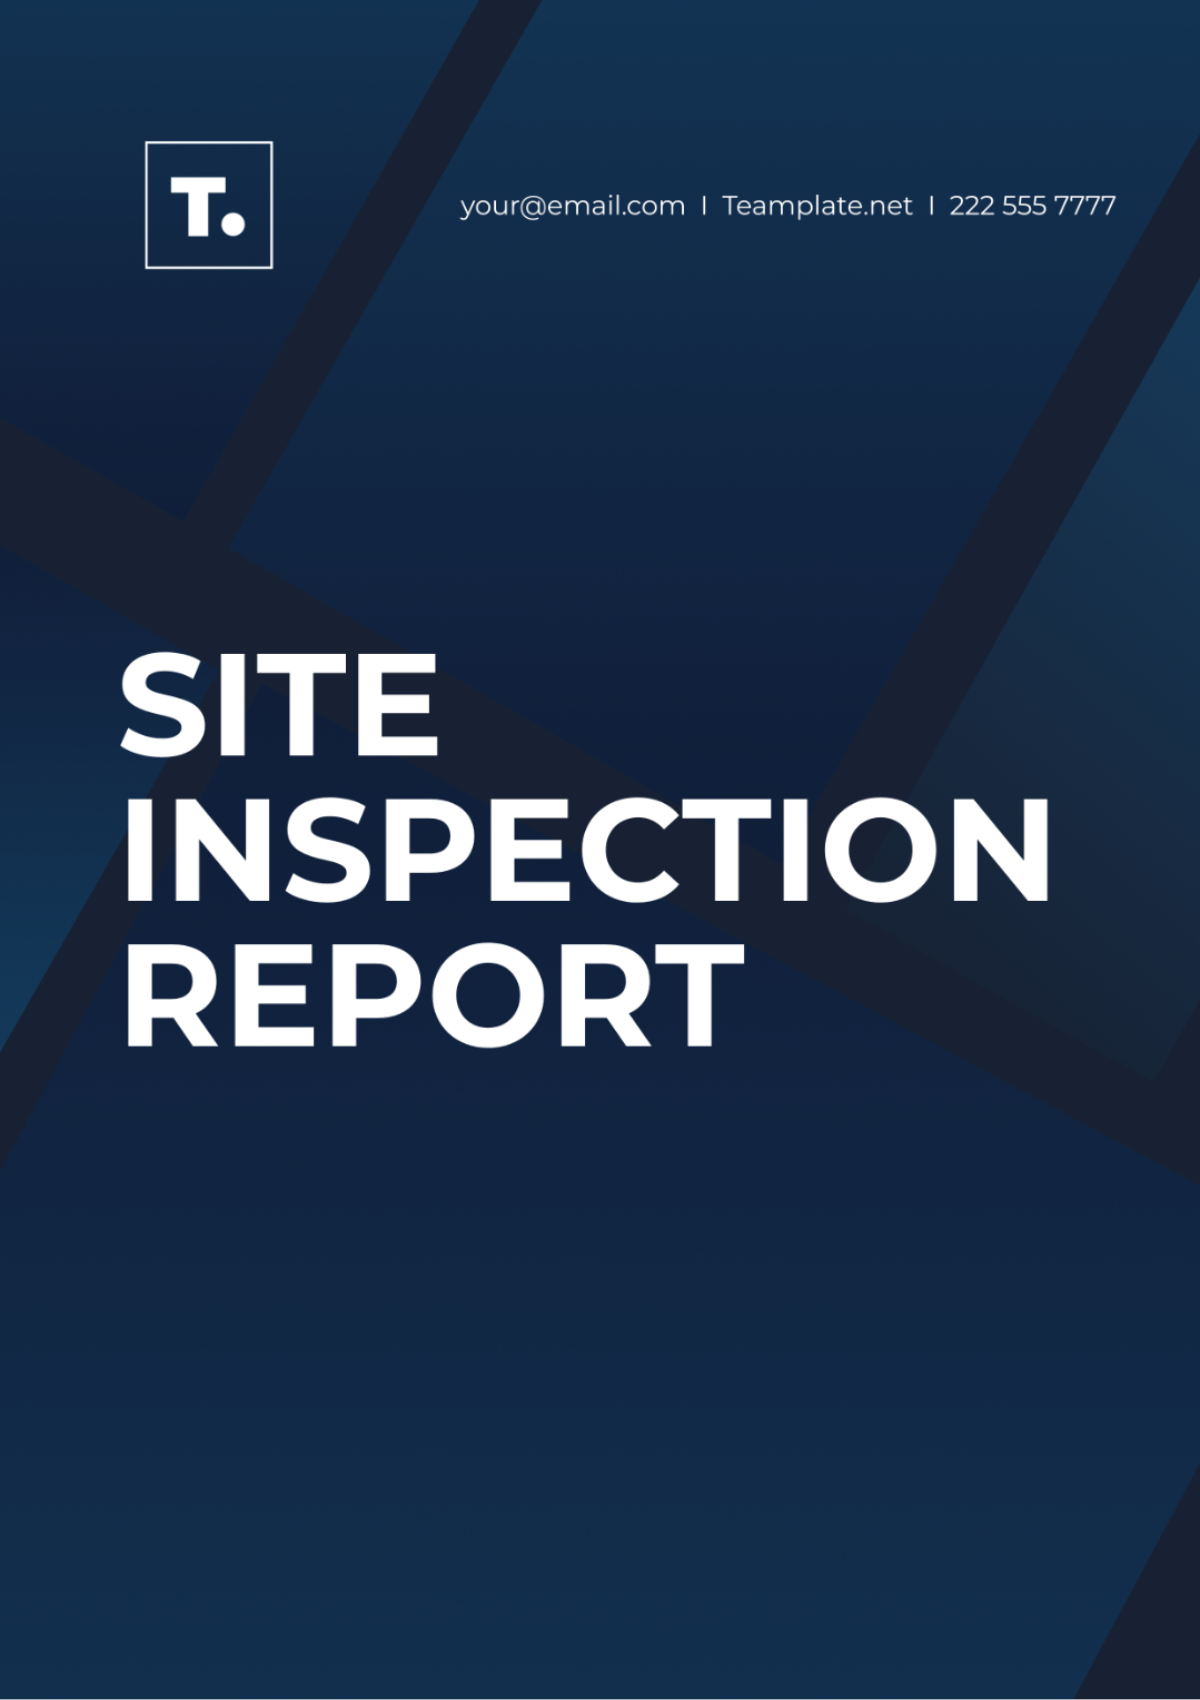 Site Inspection Report Template